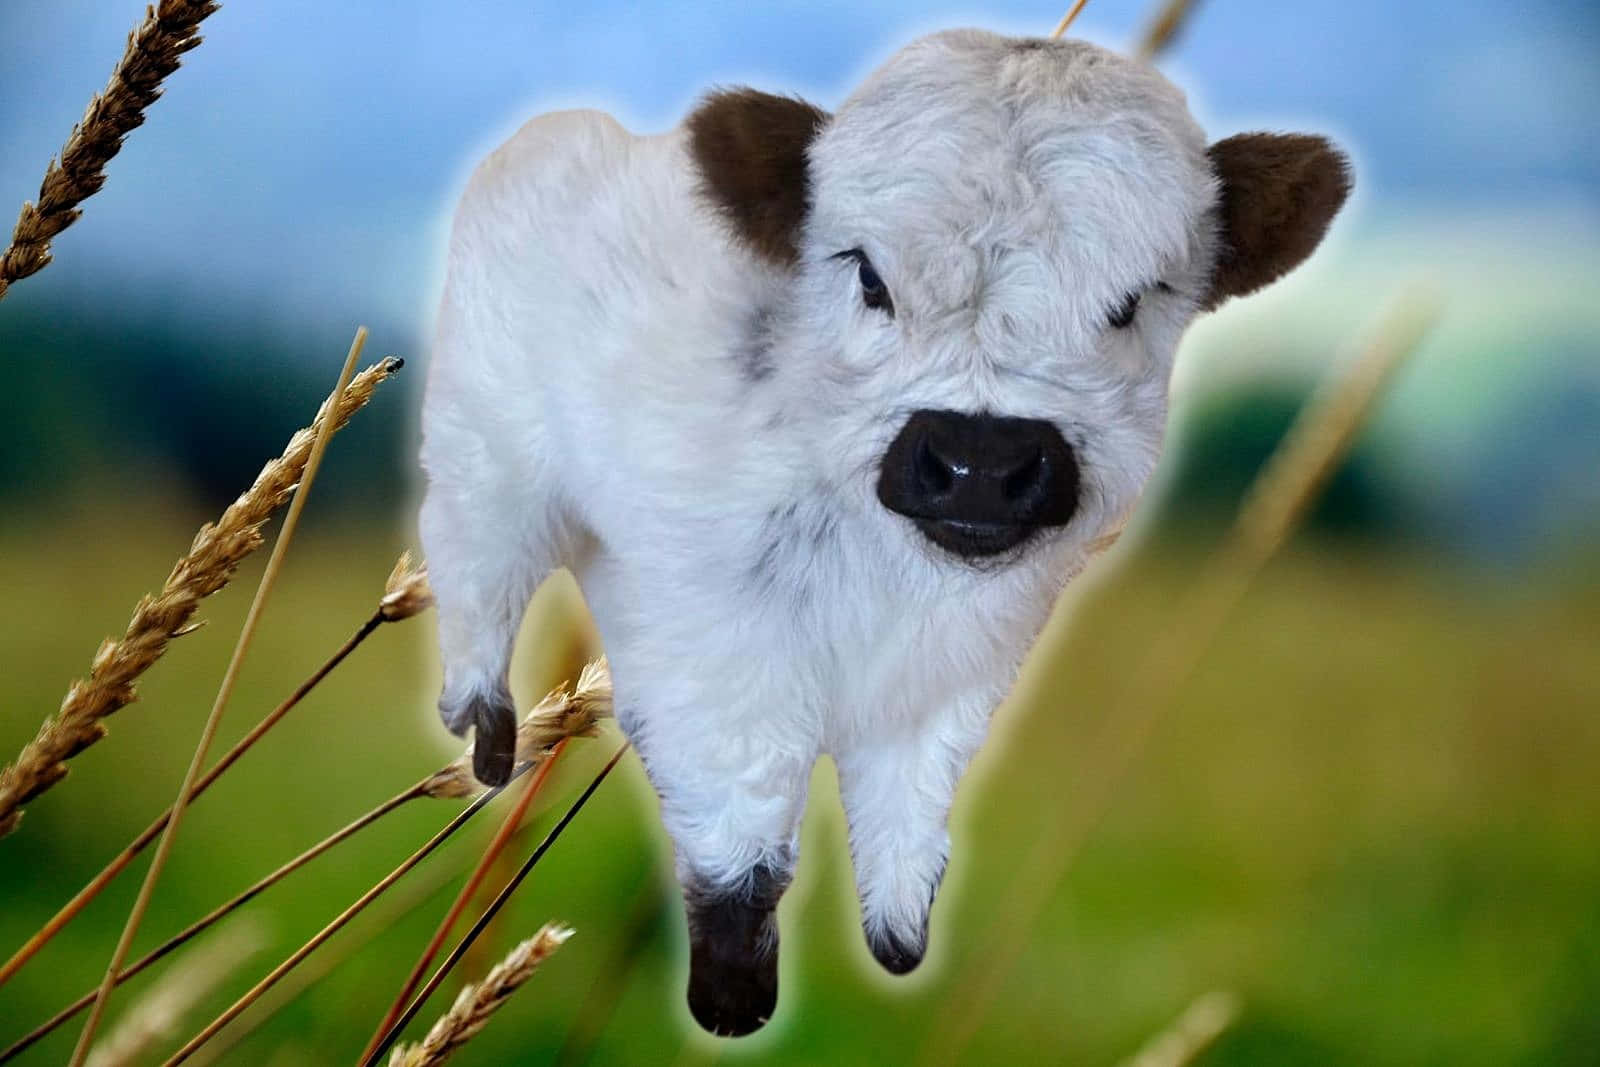 "This Cute Cow Shows How Adorable Farm Animals Can Be!"